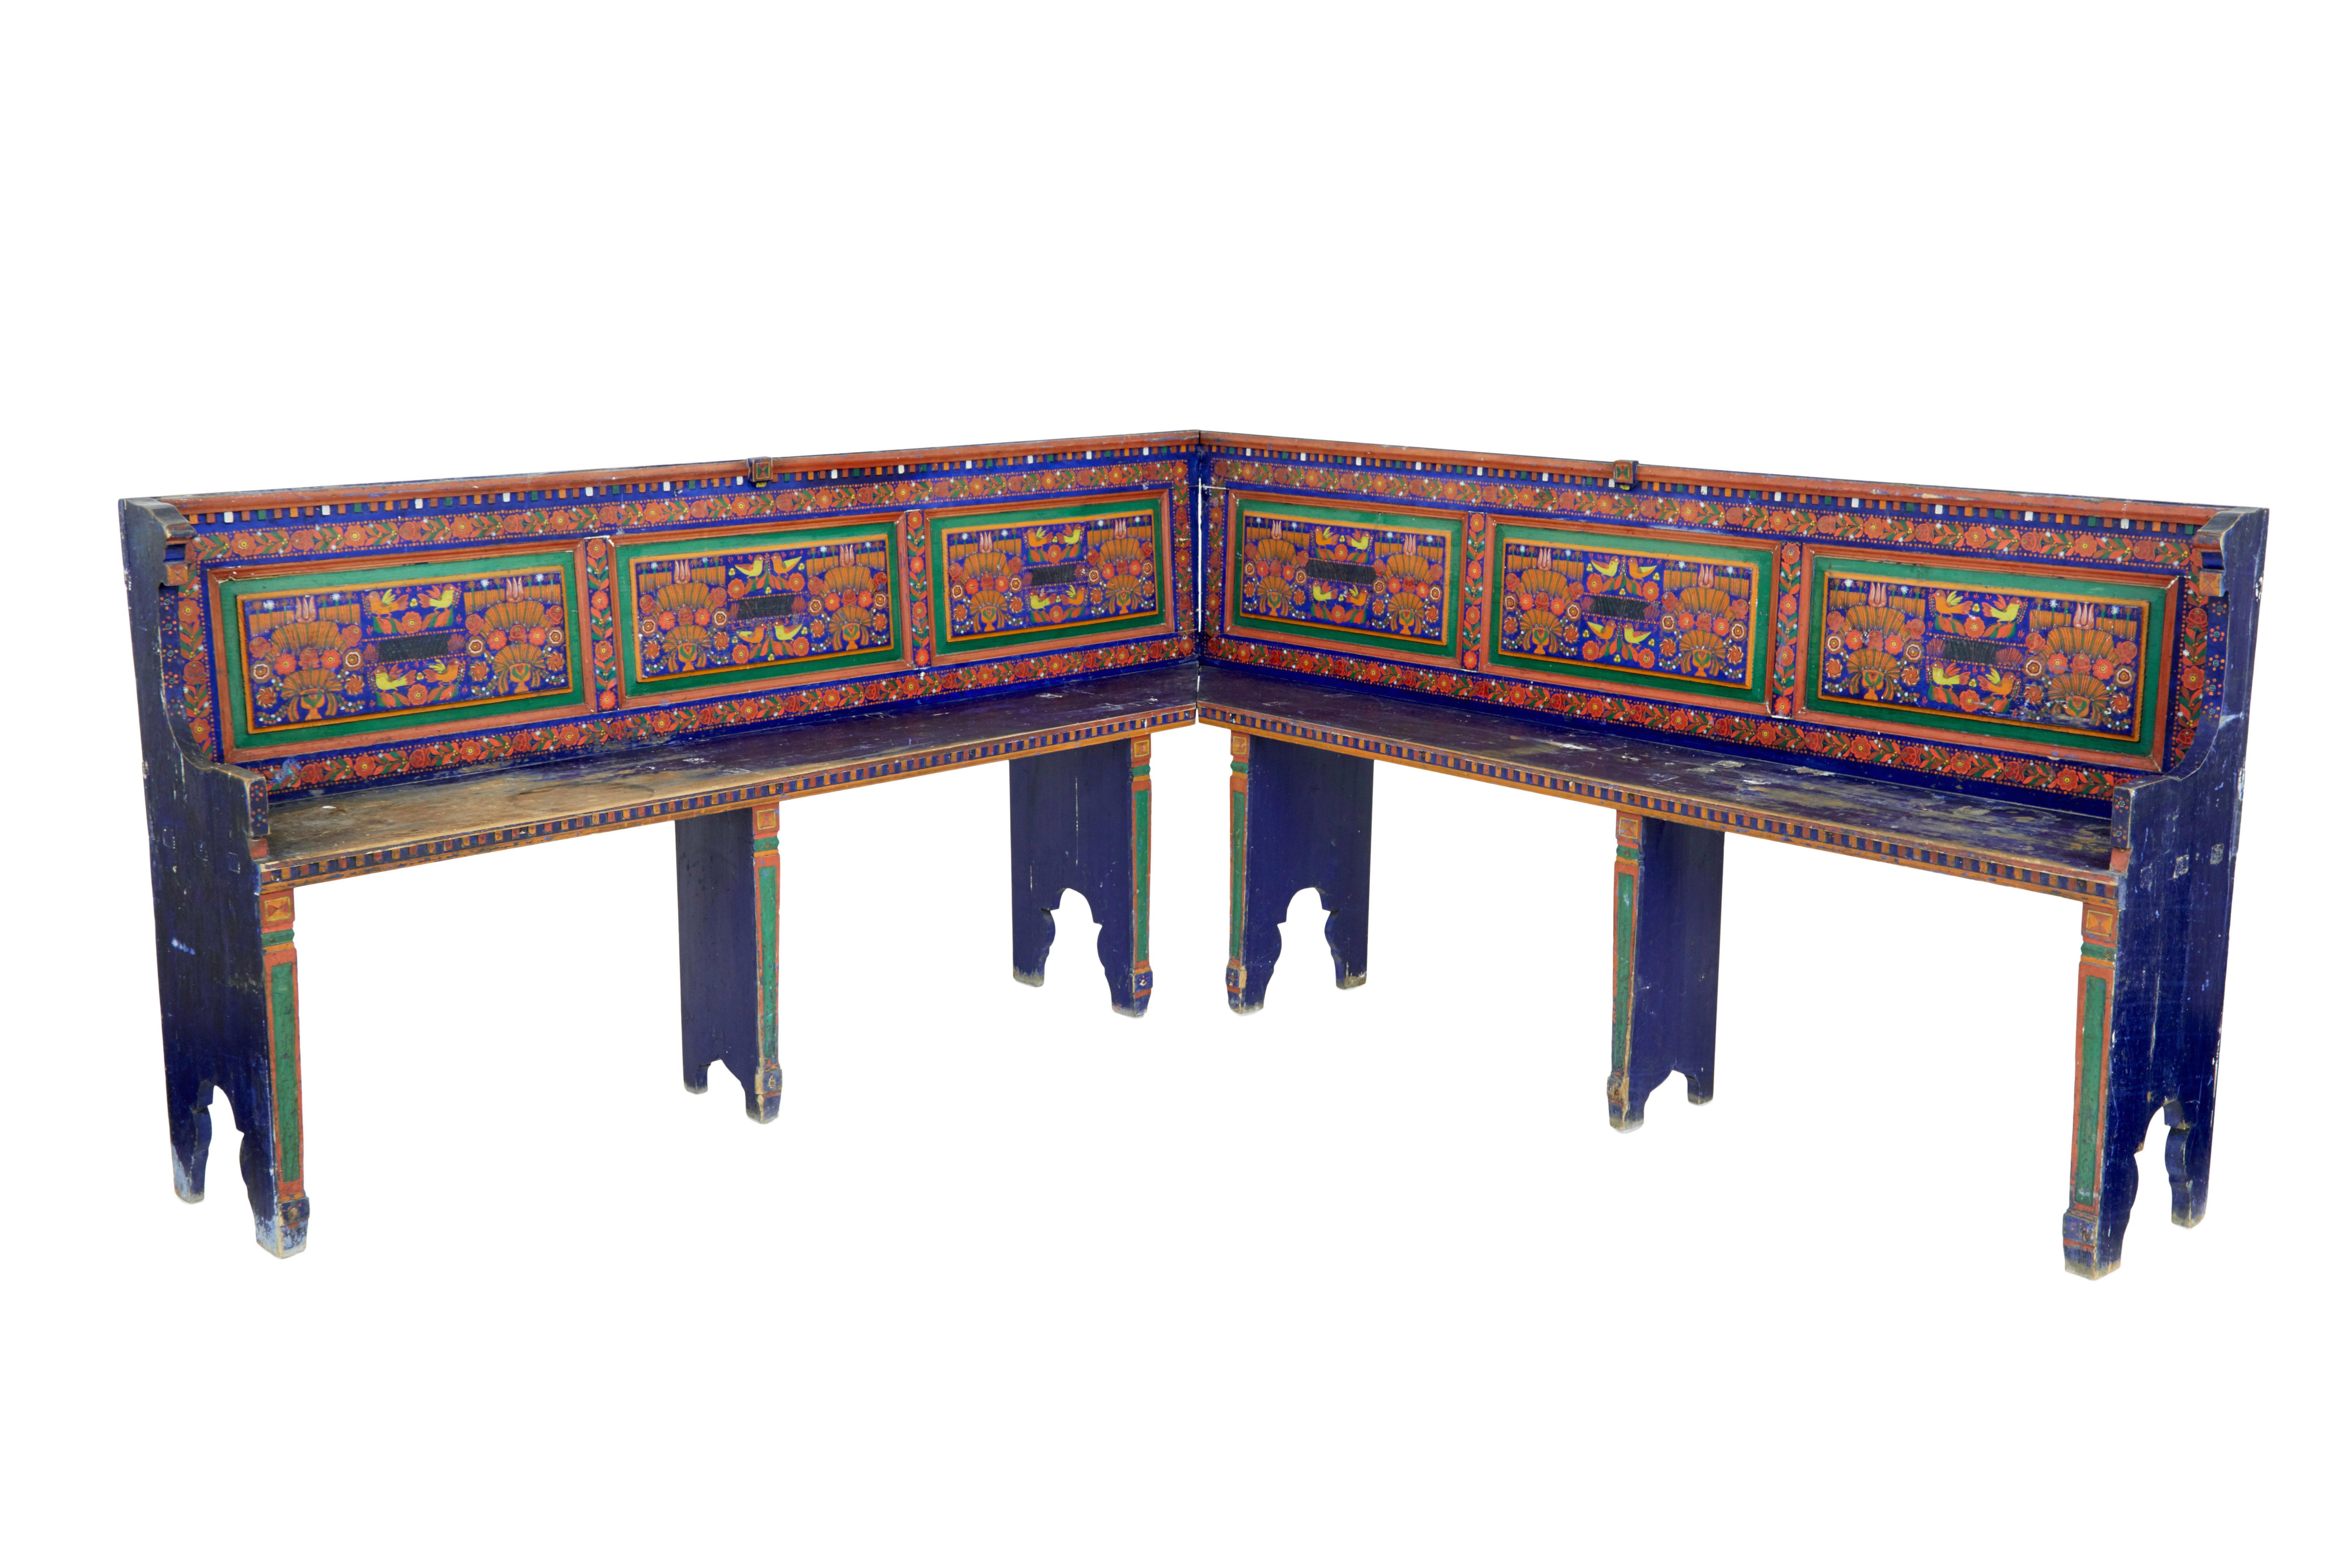 19th century hand painted folk art corner seat circa 1880.

We are pleased to offer this rare traditional piece of hungarian furniture, hand painted in a blue/green and red colour scheme.

2 benches interlock to form a 90 degree bench.  Both bench